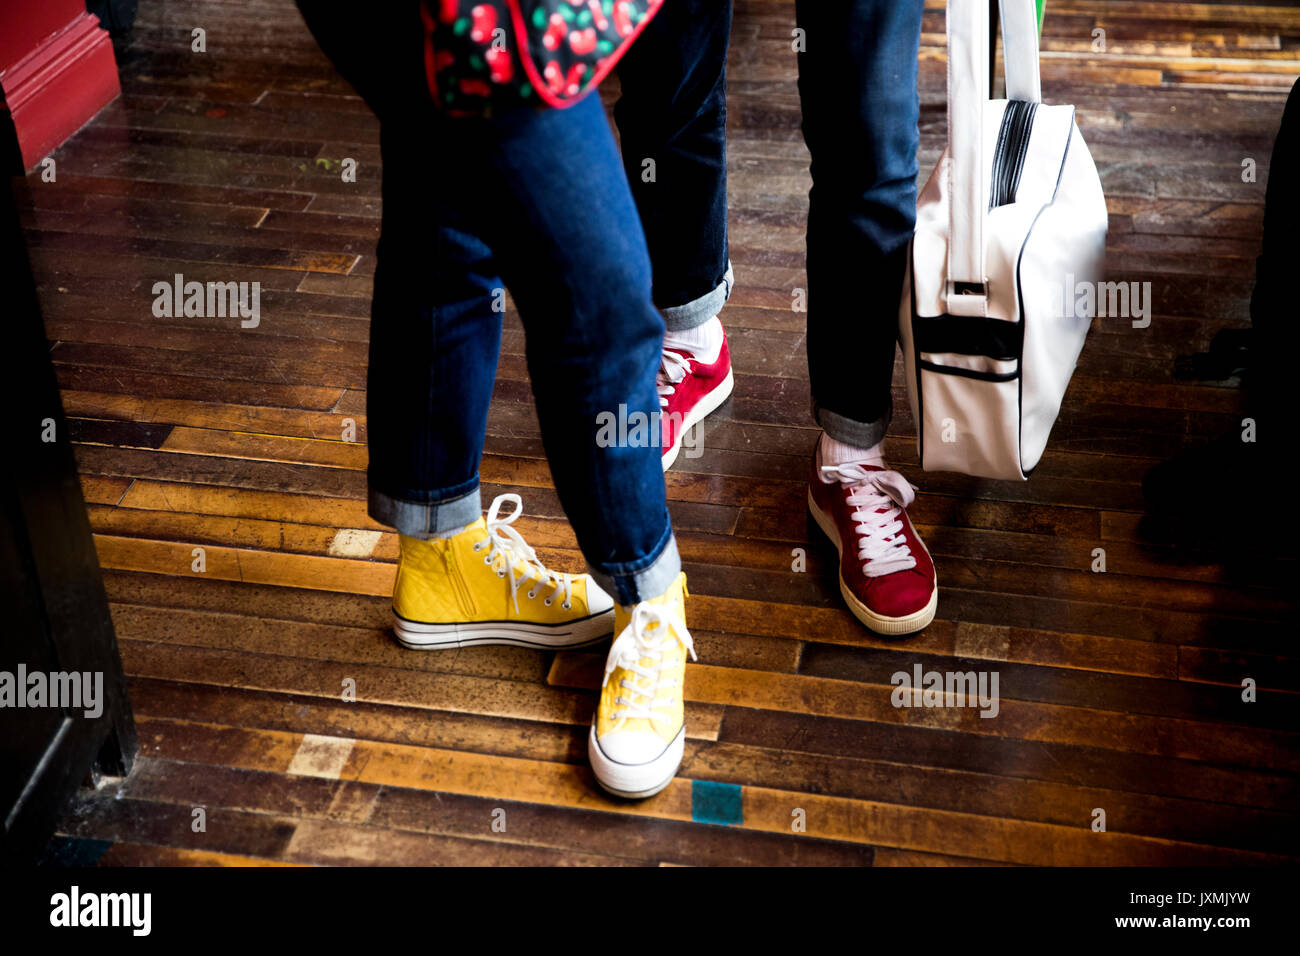 Jeans and trainers worn by couple standing on wooden flooring Stock Photo